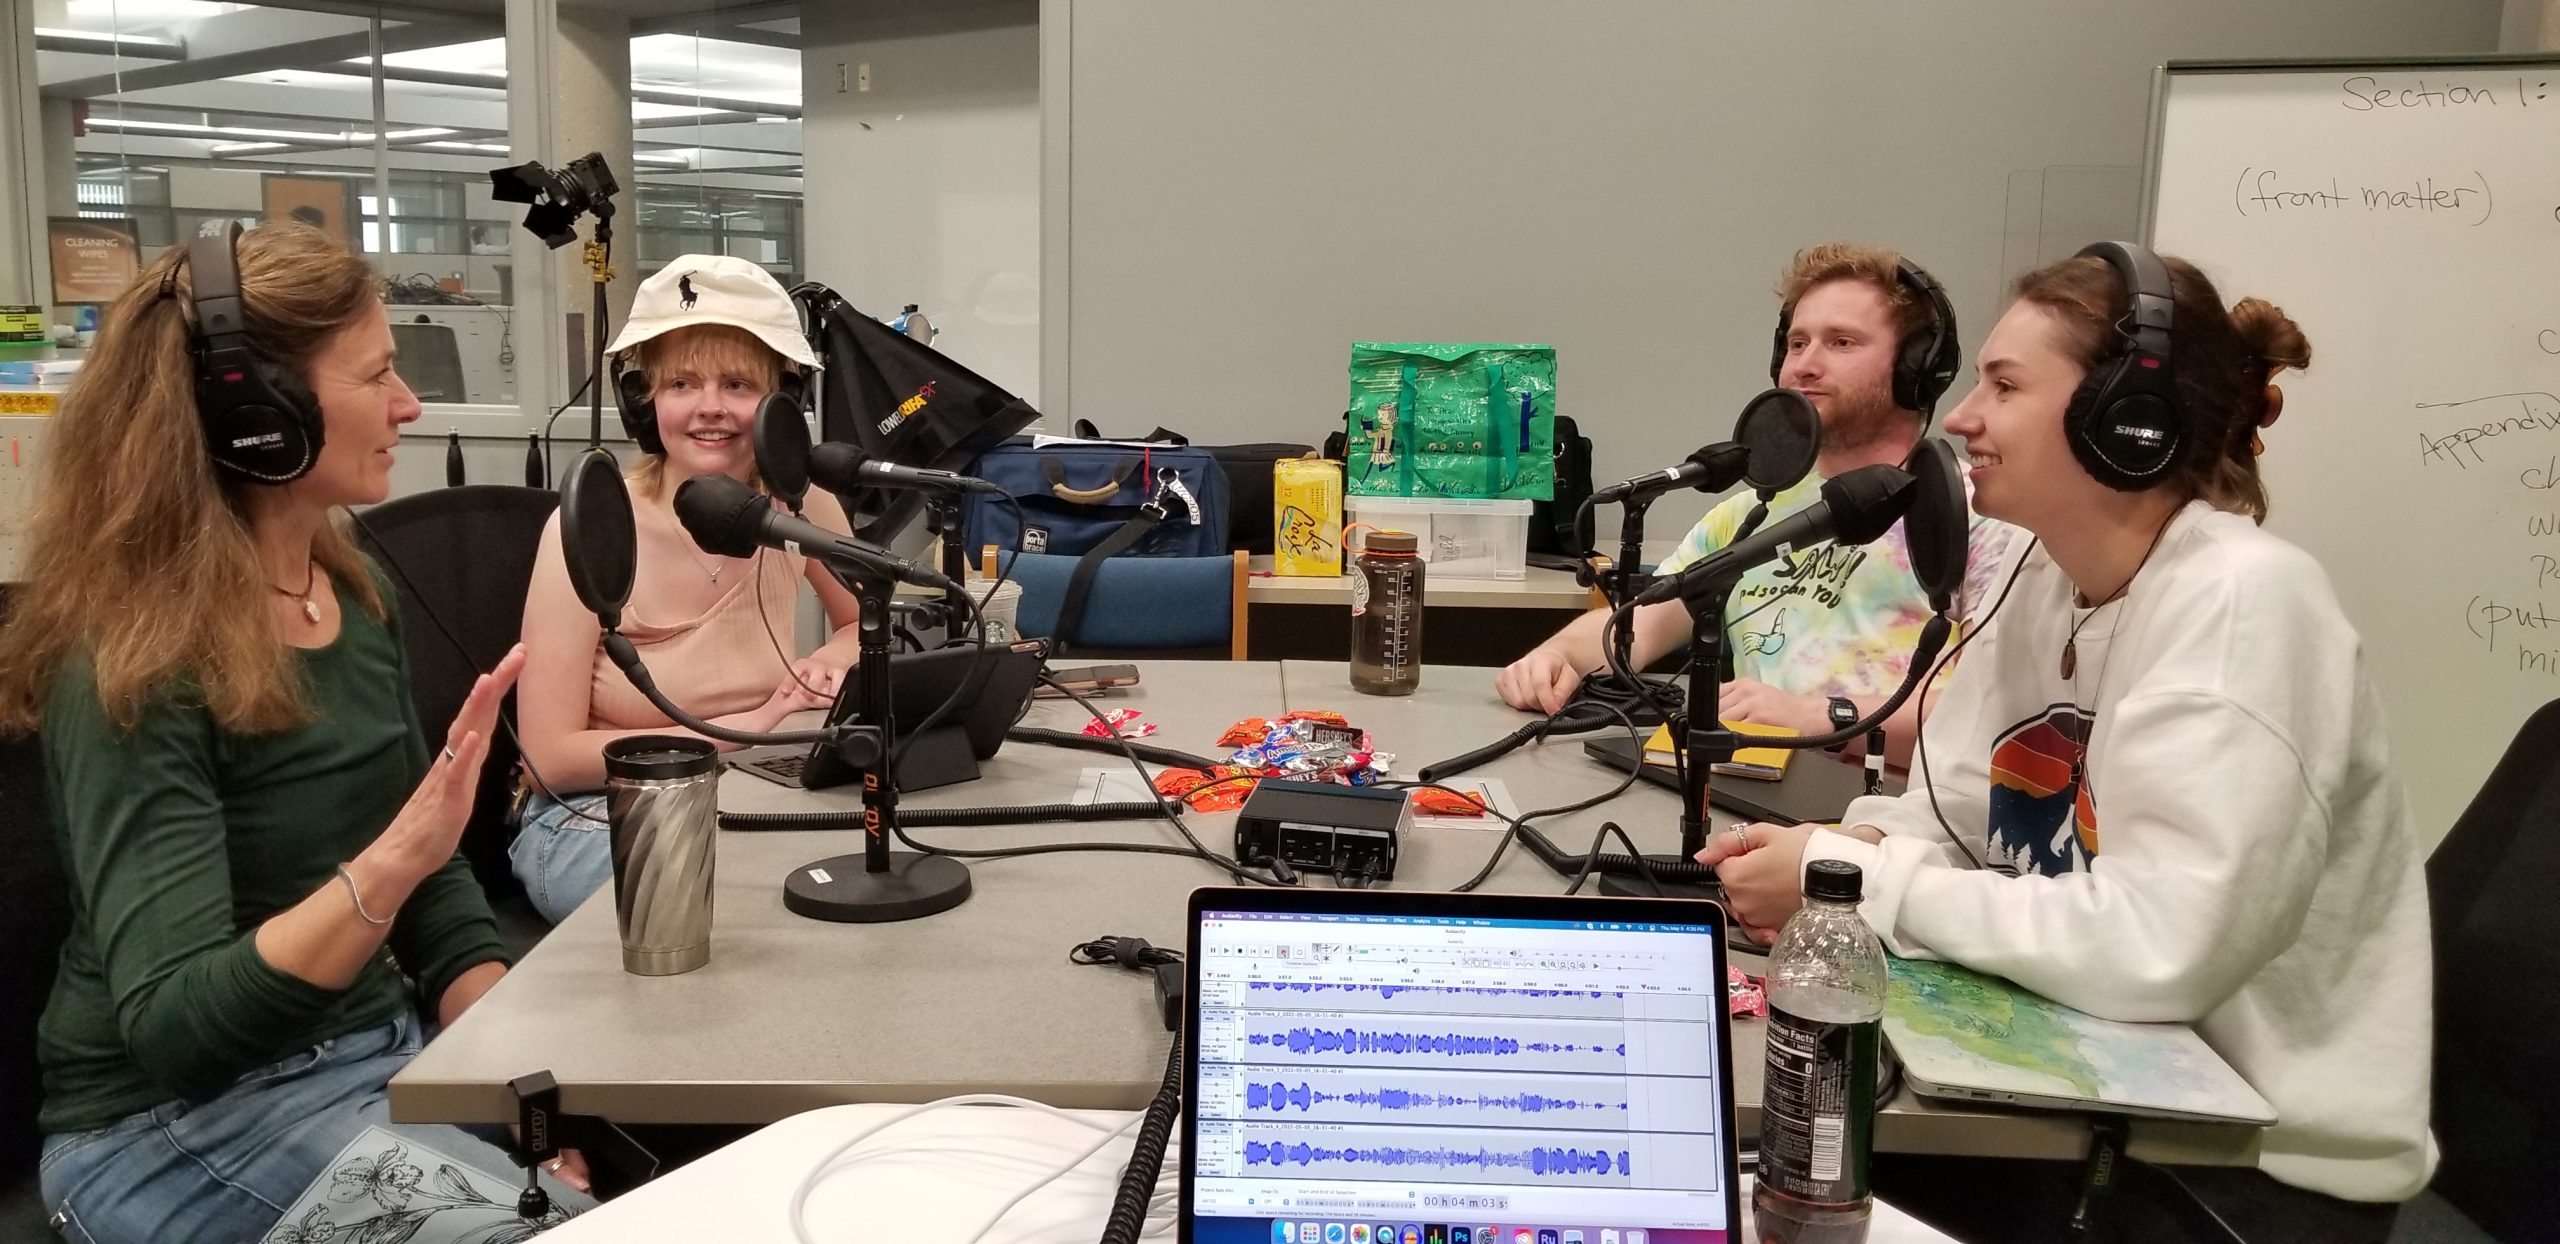 Group of 4 people sitting at table and conducting a podcast.